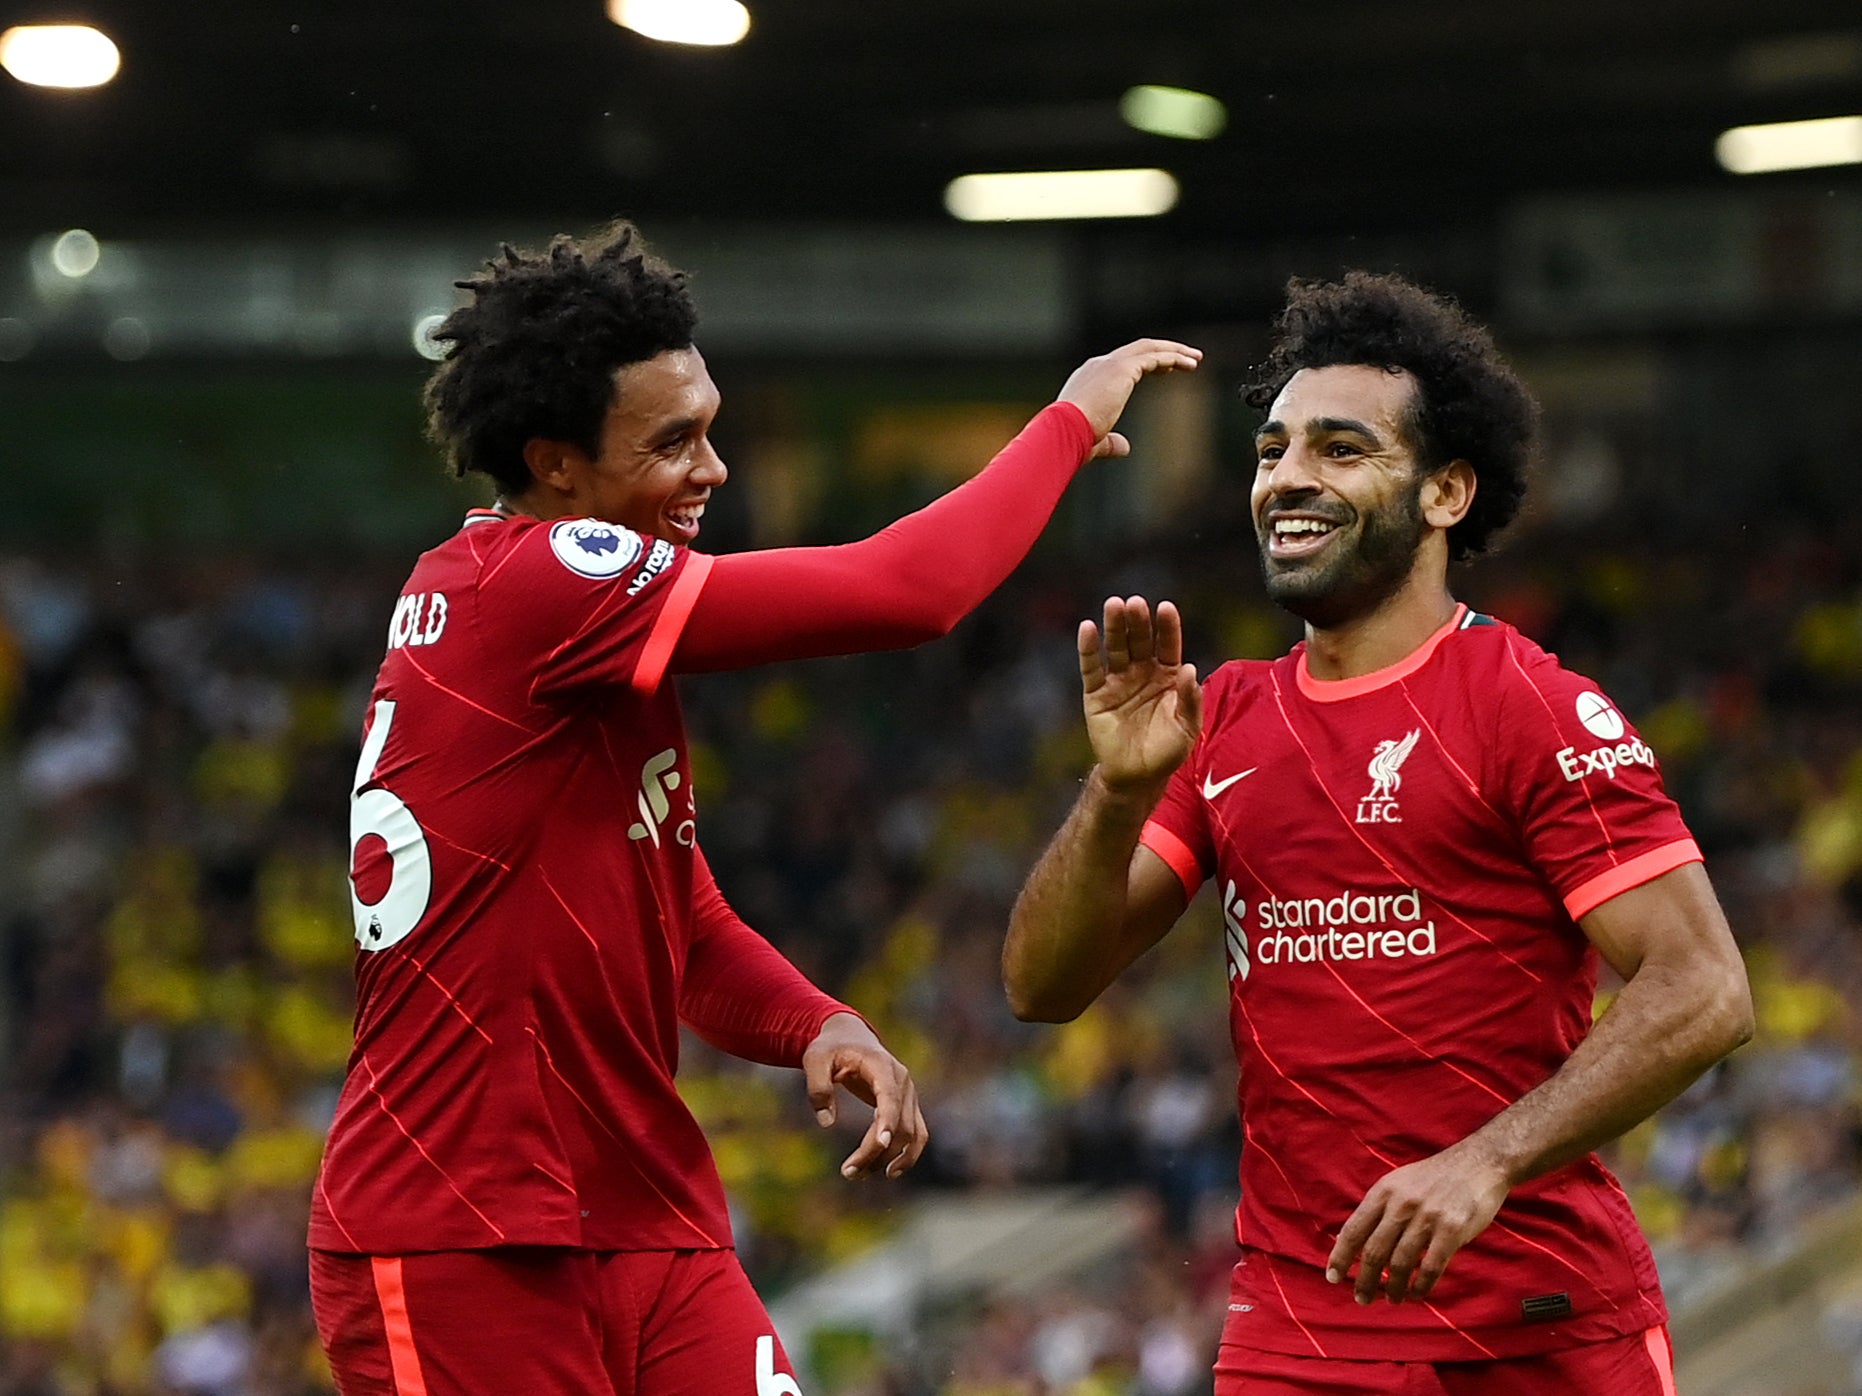 Trent Alexander-Arnold insists his relationship with Mohamed Salah has evolved